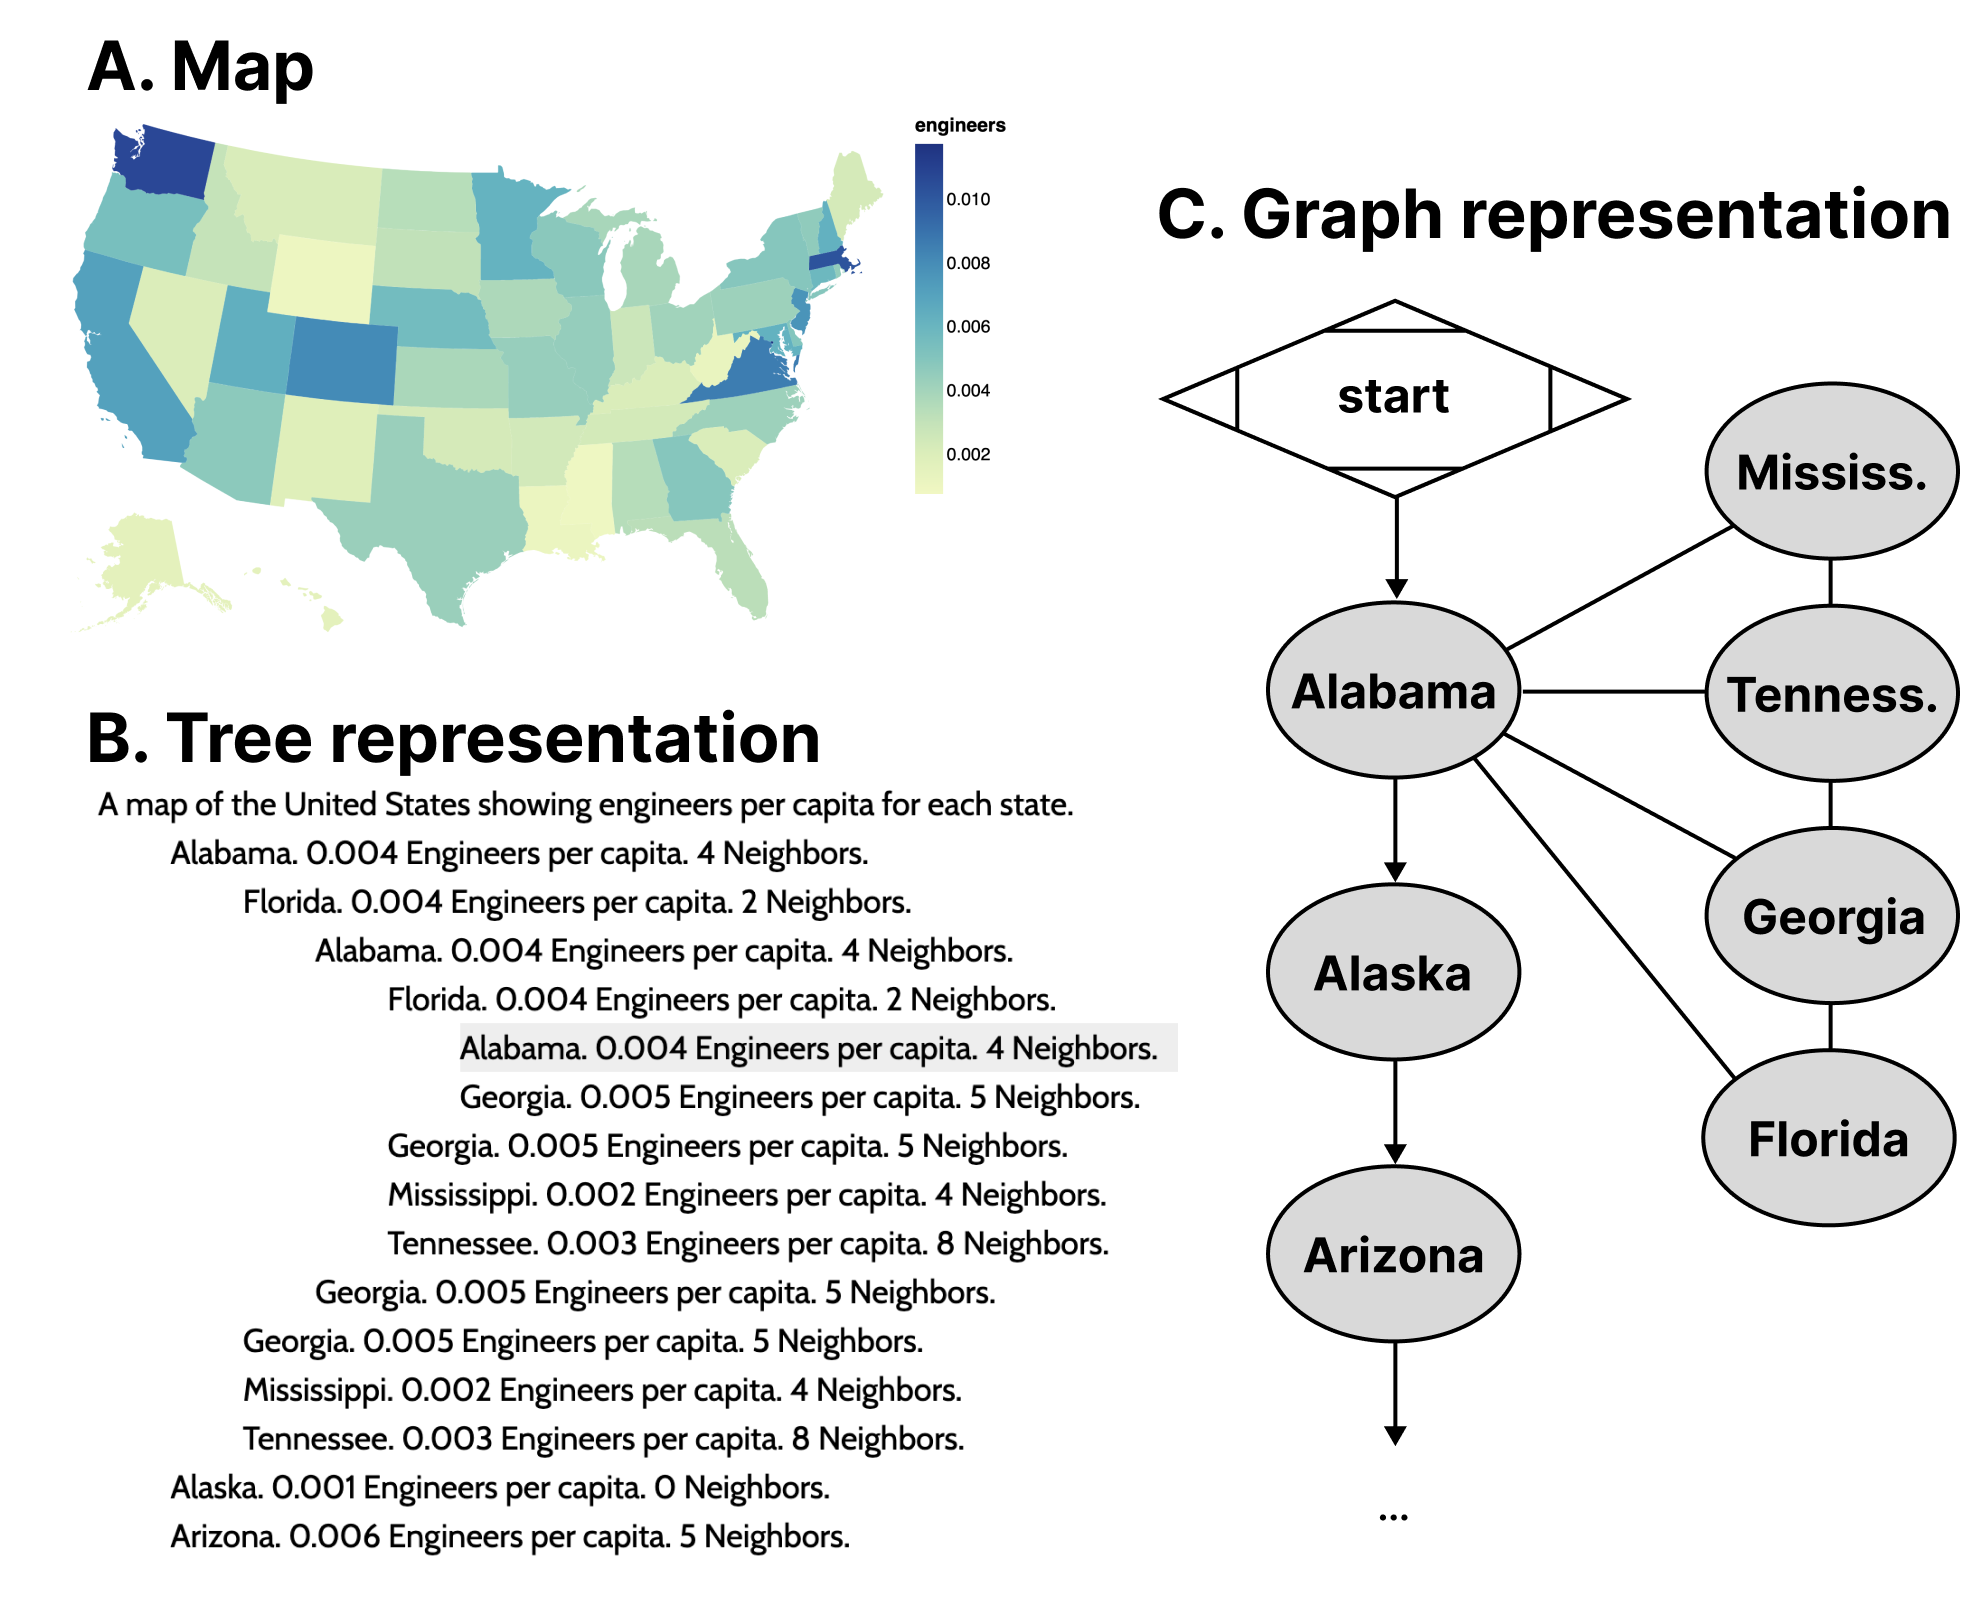 A map, tree, and graph representation. The map is encoded with colors according to engineers per capita. The tree shows a recursive pattern and a focus indicator, as if a user has navigated to Alabama then to neighboring state Florida. Instead of backing out of the structure, the user continued to navigate between them, which created a large amount of waste and repetition between these two states and their corresponding lists of neighboring states. The graph representation shows a start, Alabama, Alaska, Arizona, and a repeating symbol. Connected to Alabama are example neighboring nodes, each listed once: Mississippi, Tennessee, Georgia, and Florida.